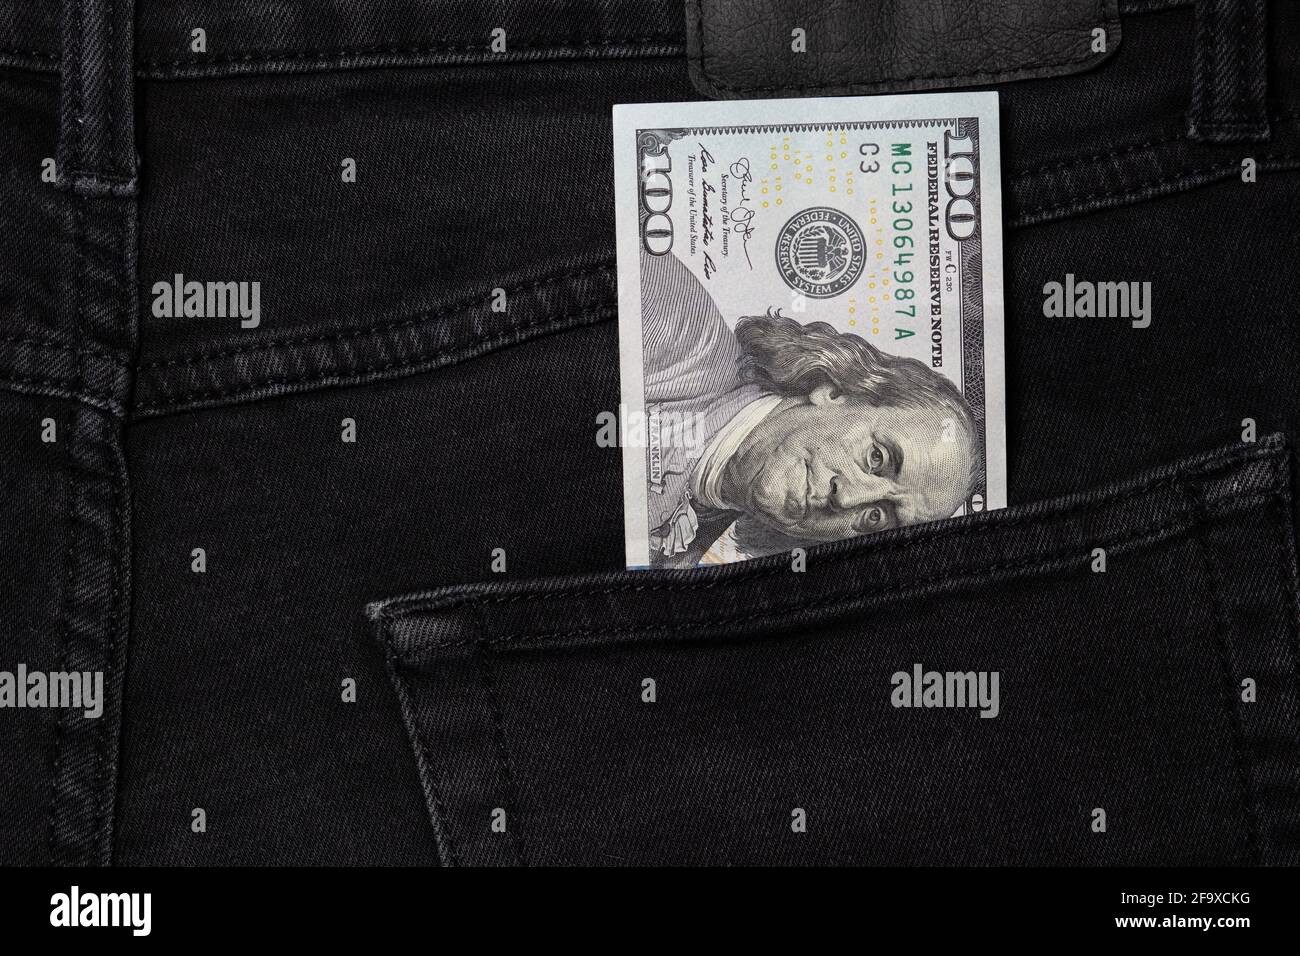 One hundred dollar bill sticking out of the pocket of black jeans Stock Photo